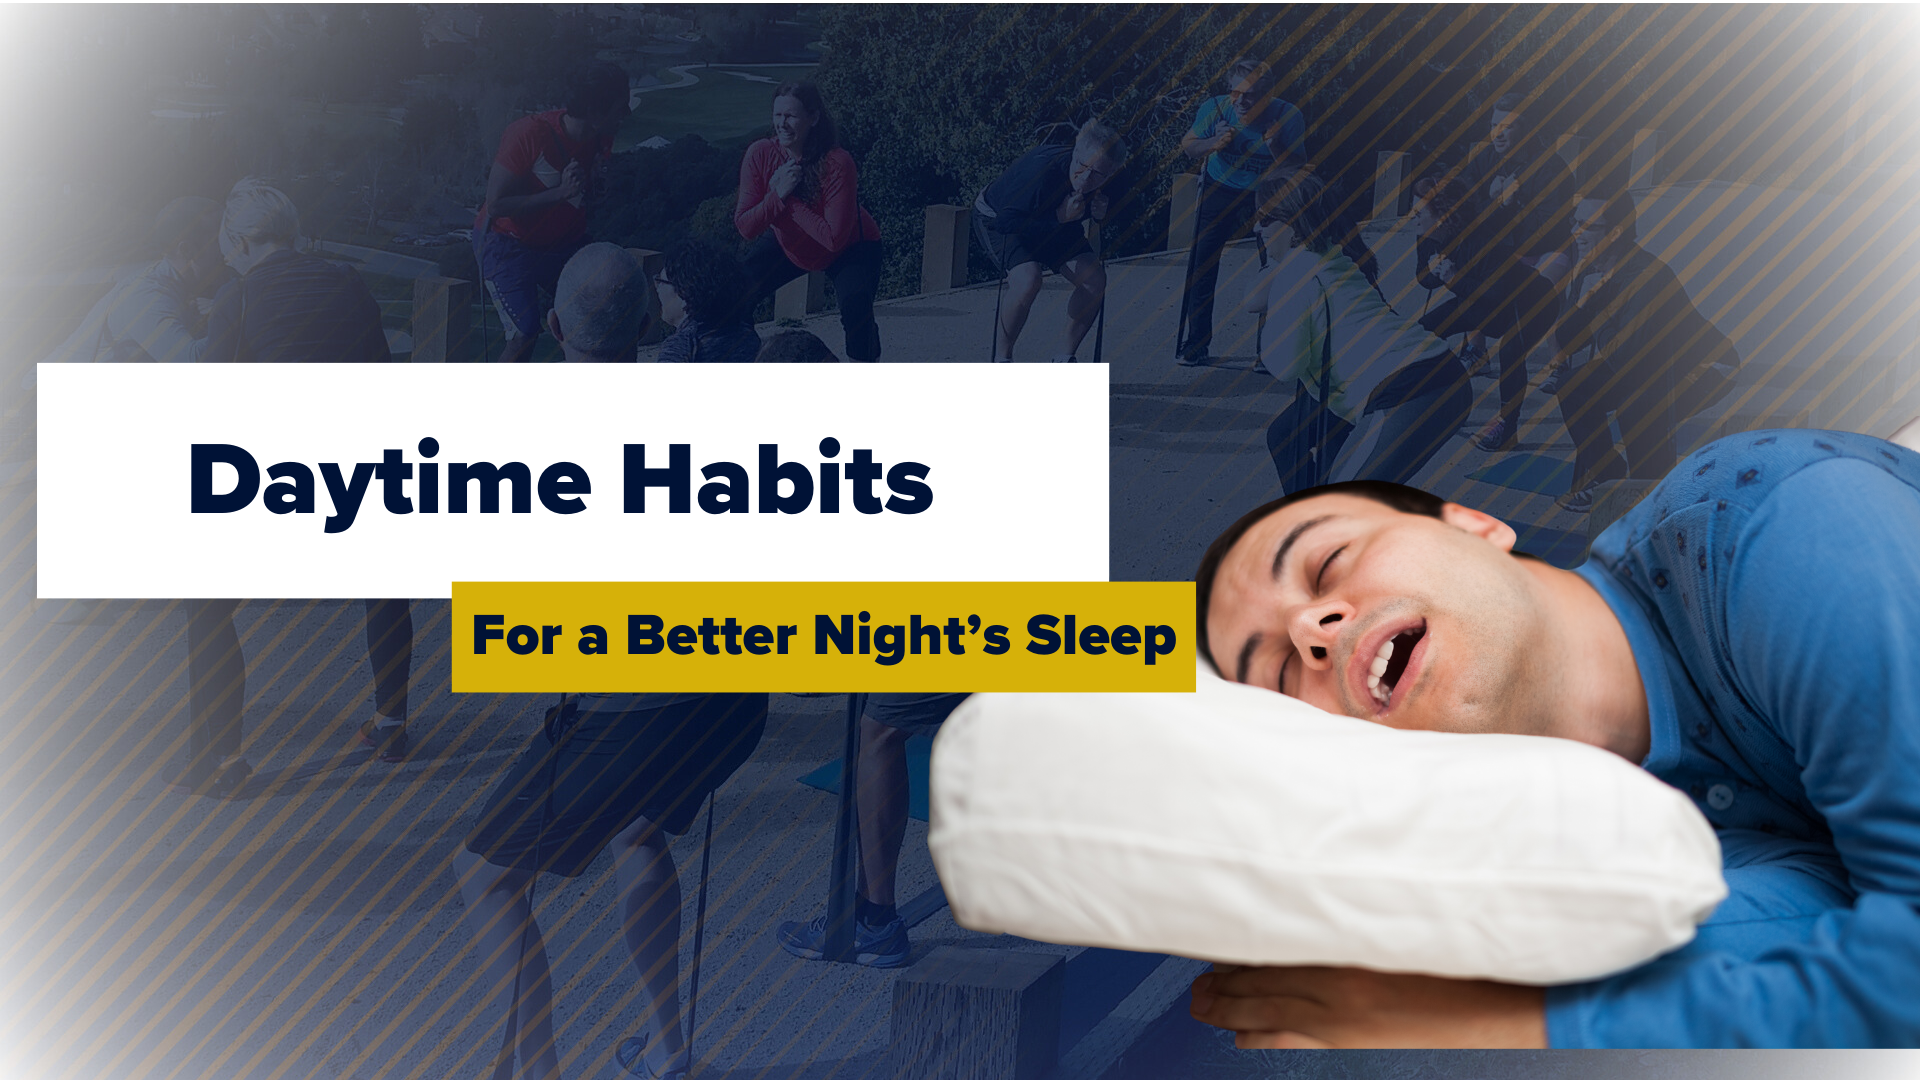 Daytime Habits for a Better Night Sleep